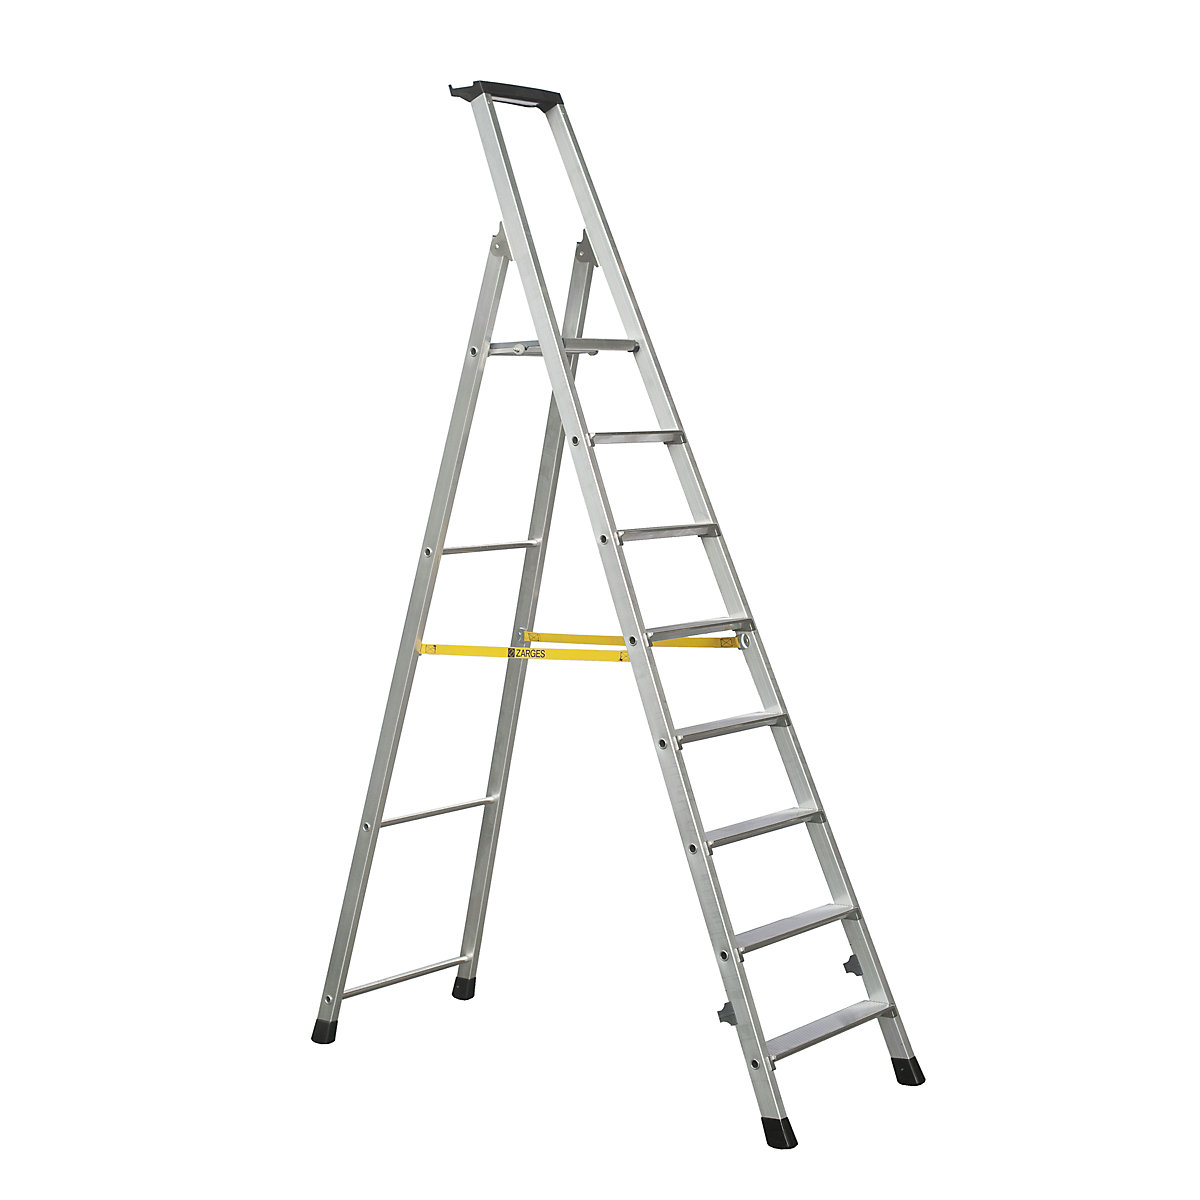 Folding step ladder, single sided access – ZARGES